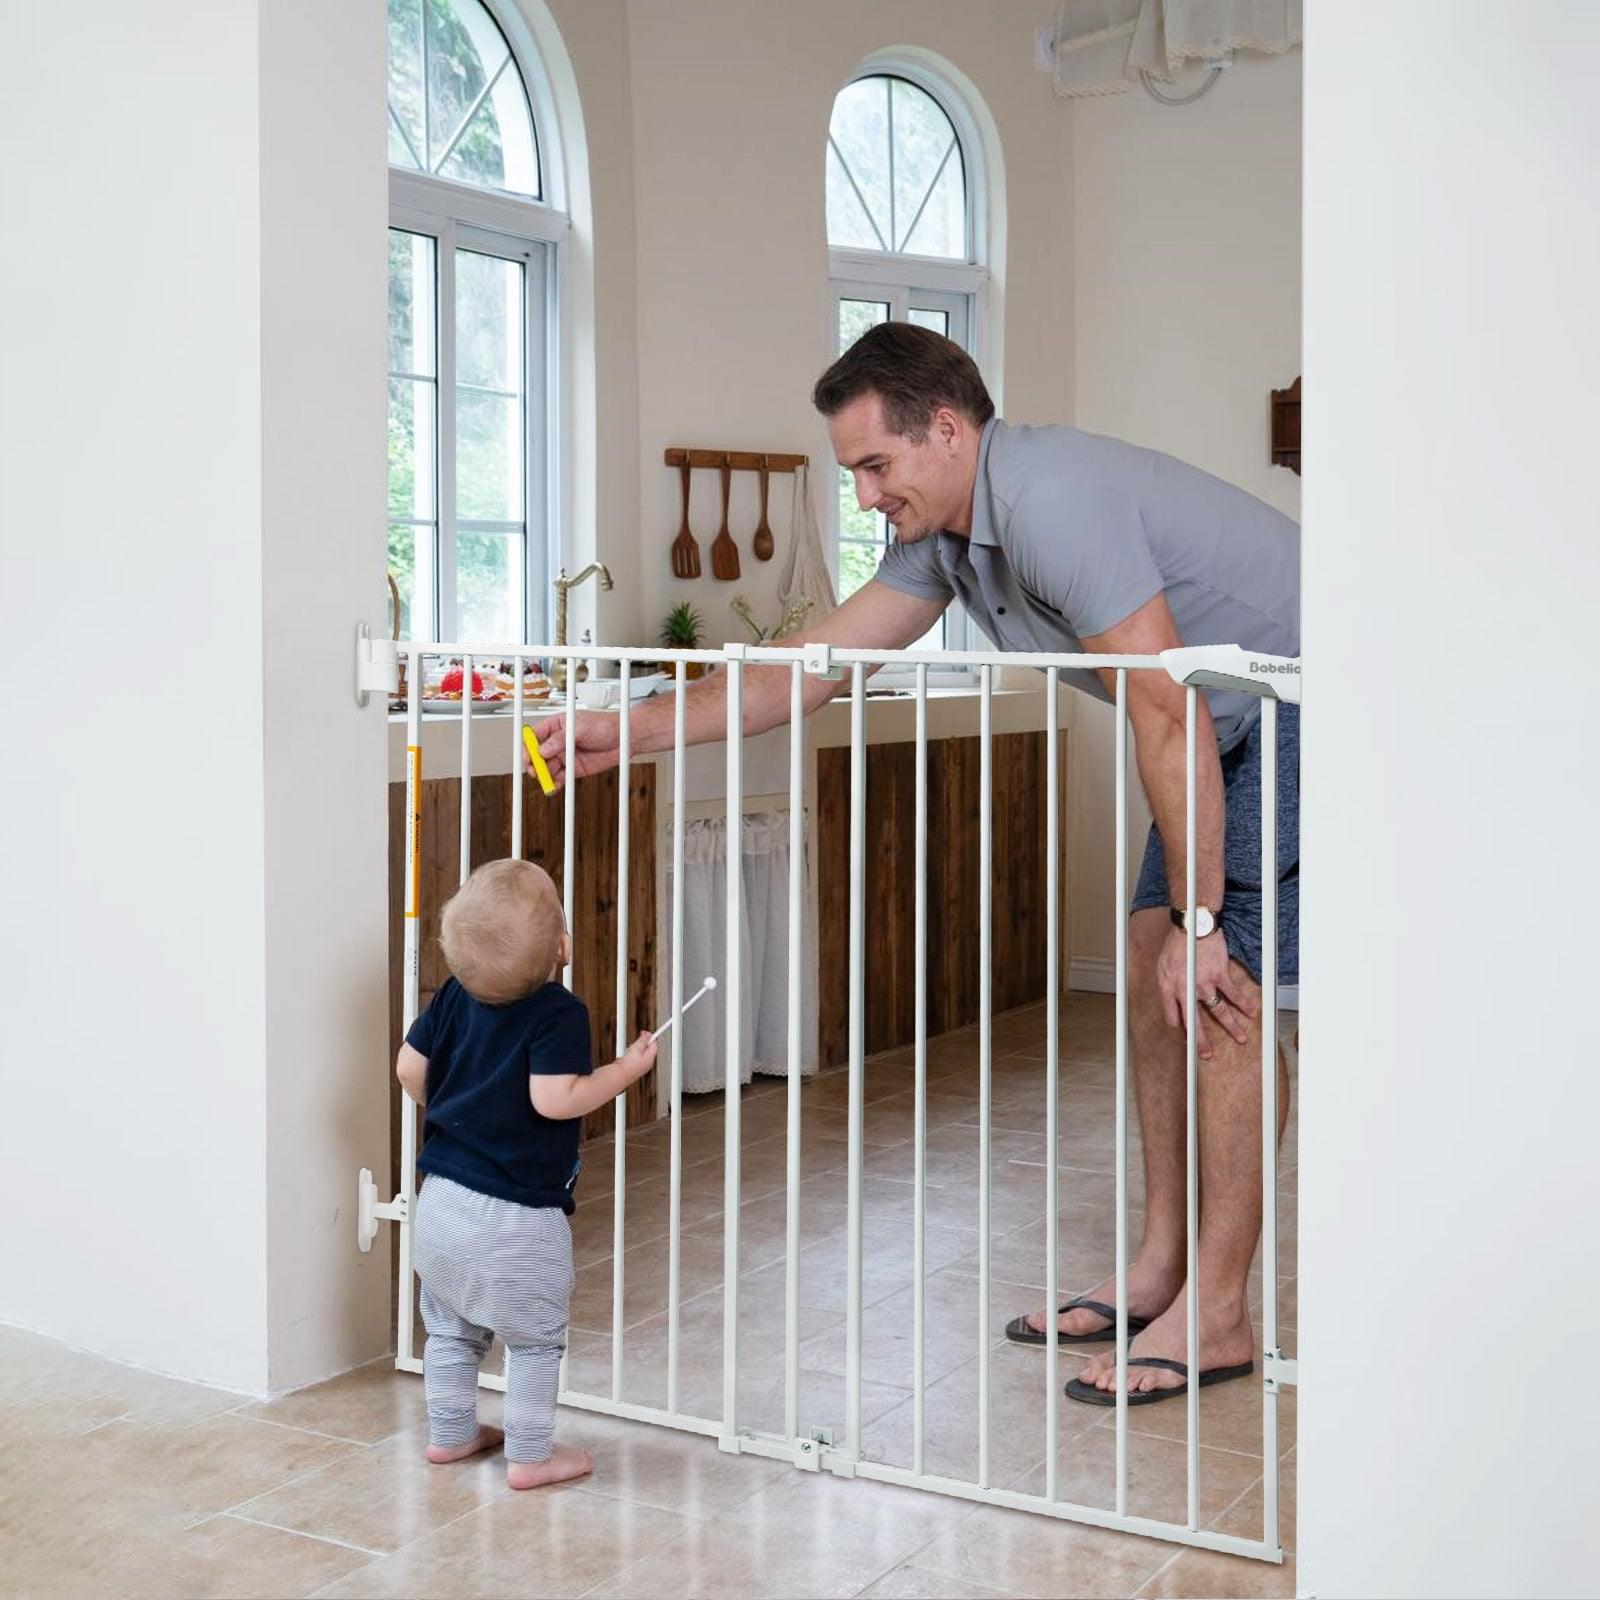 Babelio 34" Extra Tall Baby/Dog Gate with No Threshold Design Walk Thru Door, 26-43" Auto Close Safety Gate for Babies, Elders and Pets - babeliobaby